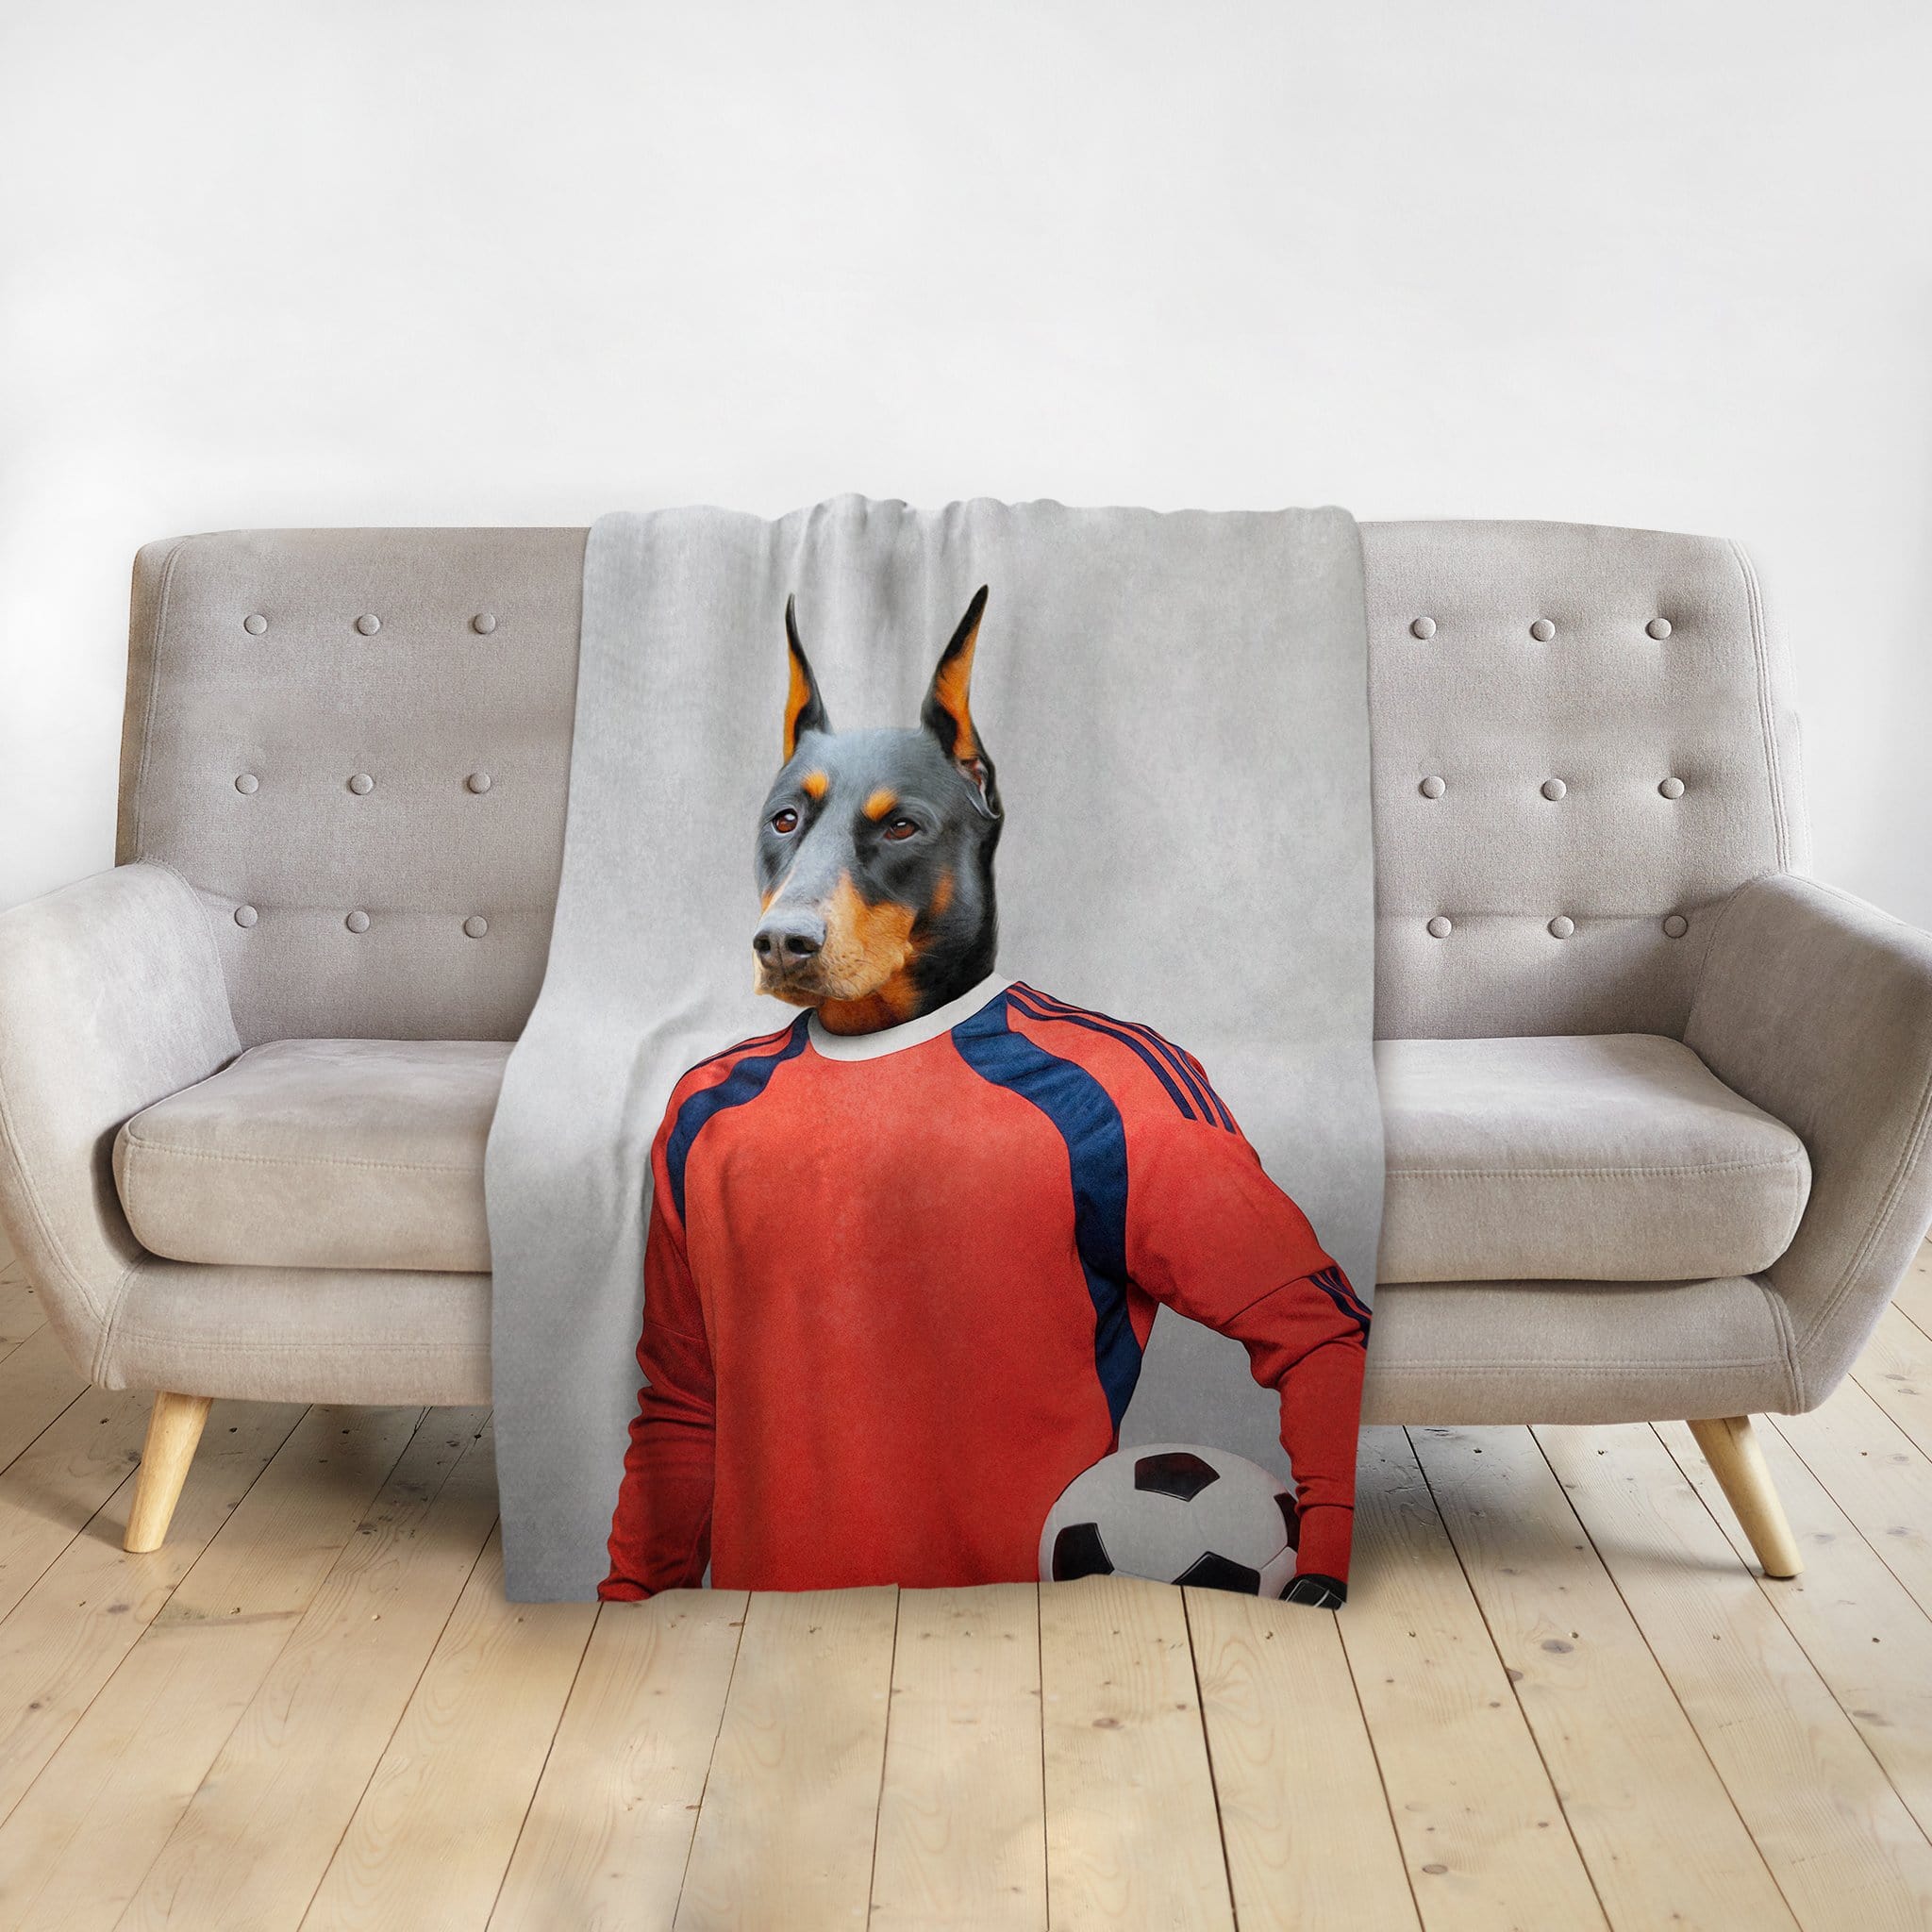 'The Soccer Goalie' Personalized Pet Blanket